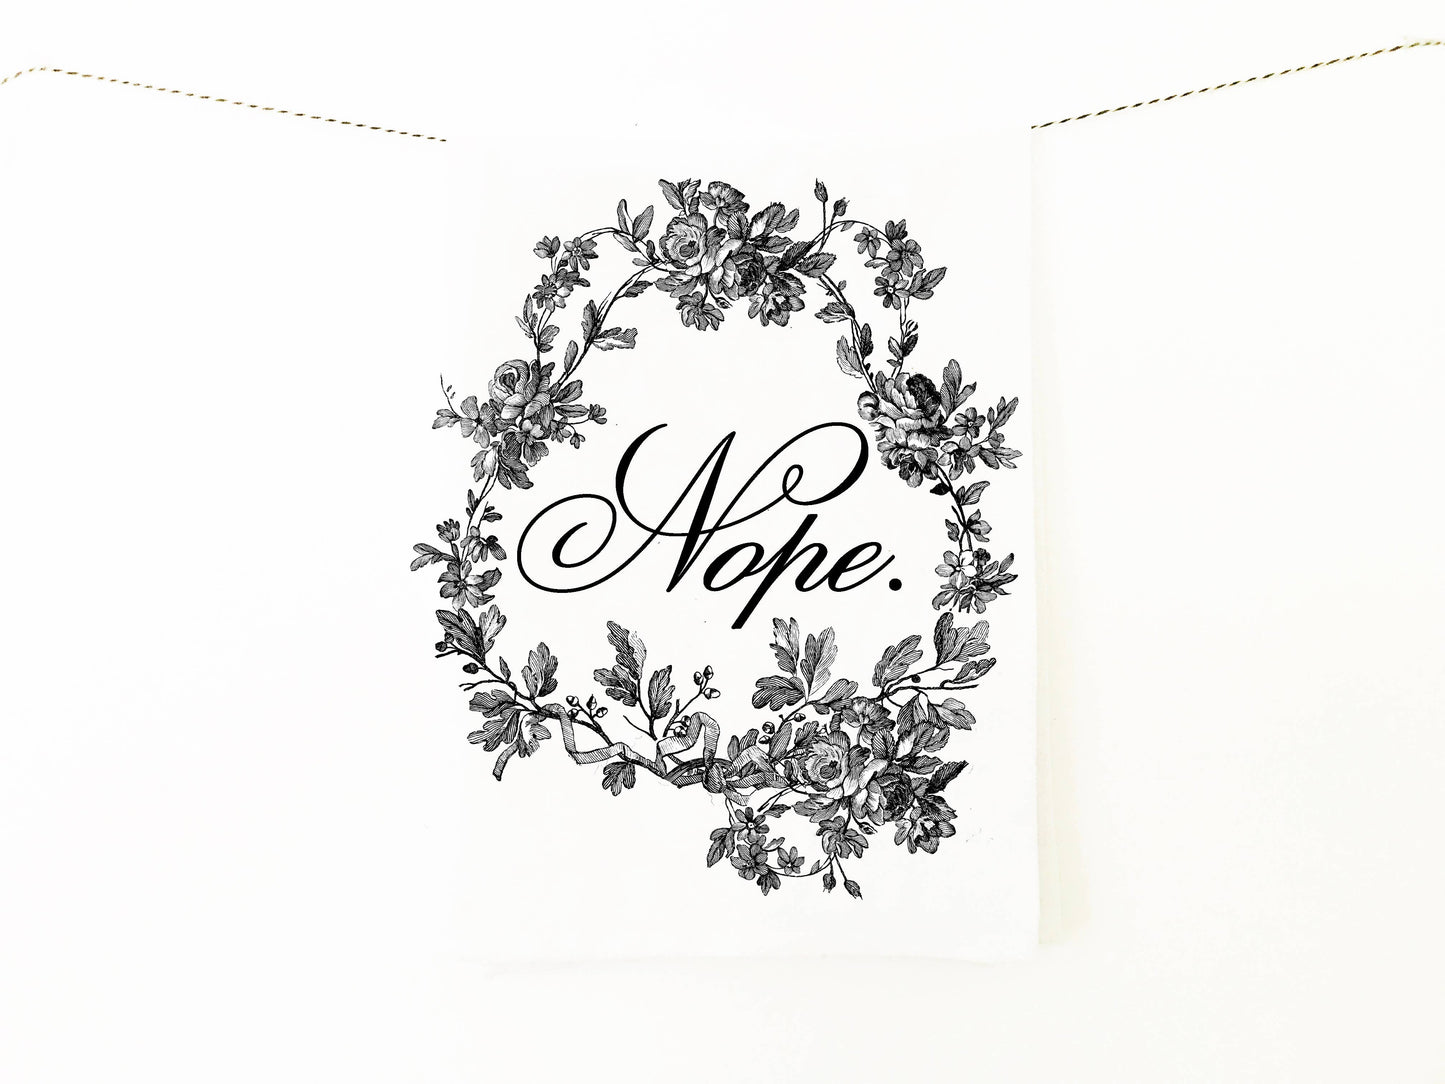 The Coin Laundry Nope Cotton Kitchen Towel